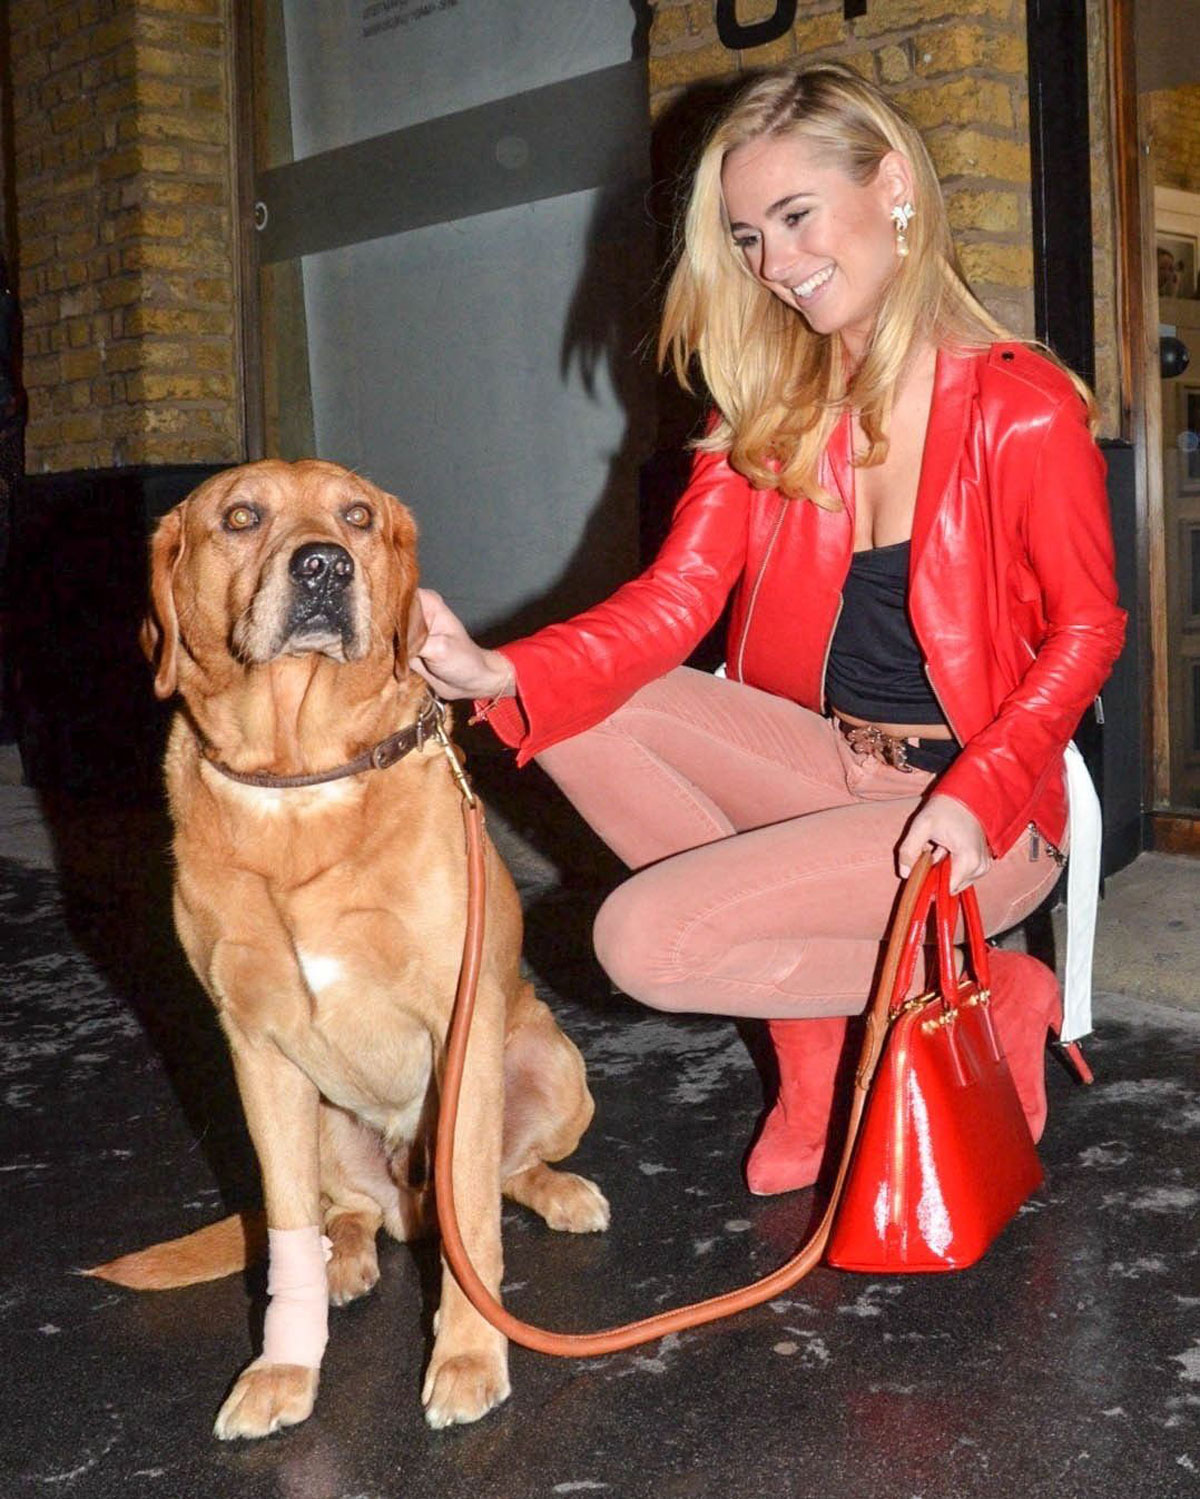 Kimberley Garner arrives at The Company of Dogs Pet Portrait Exhibition